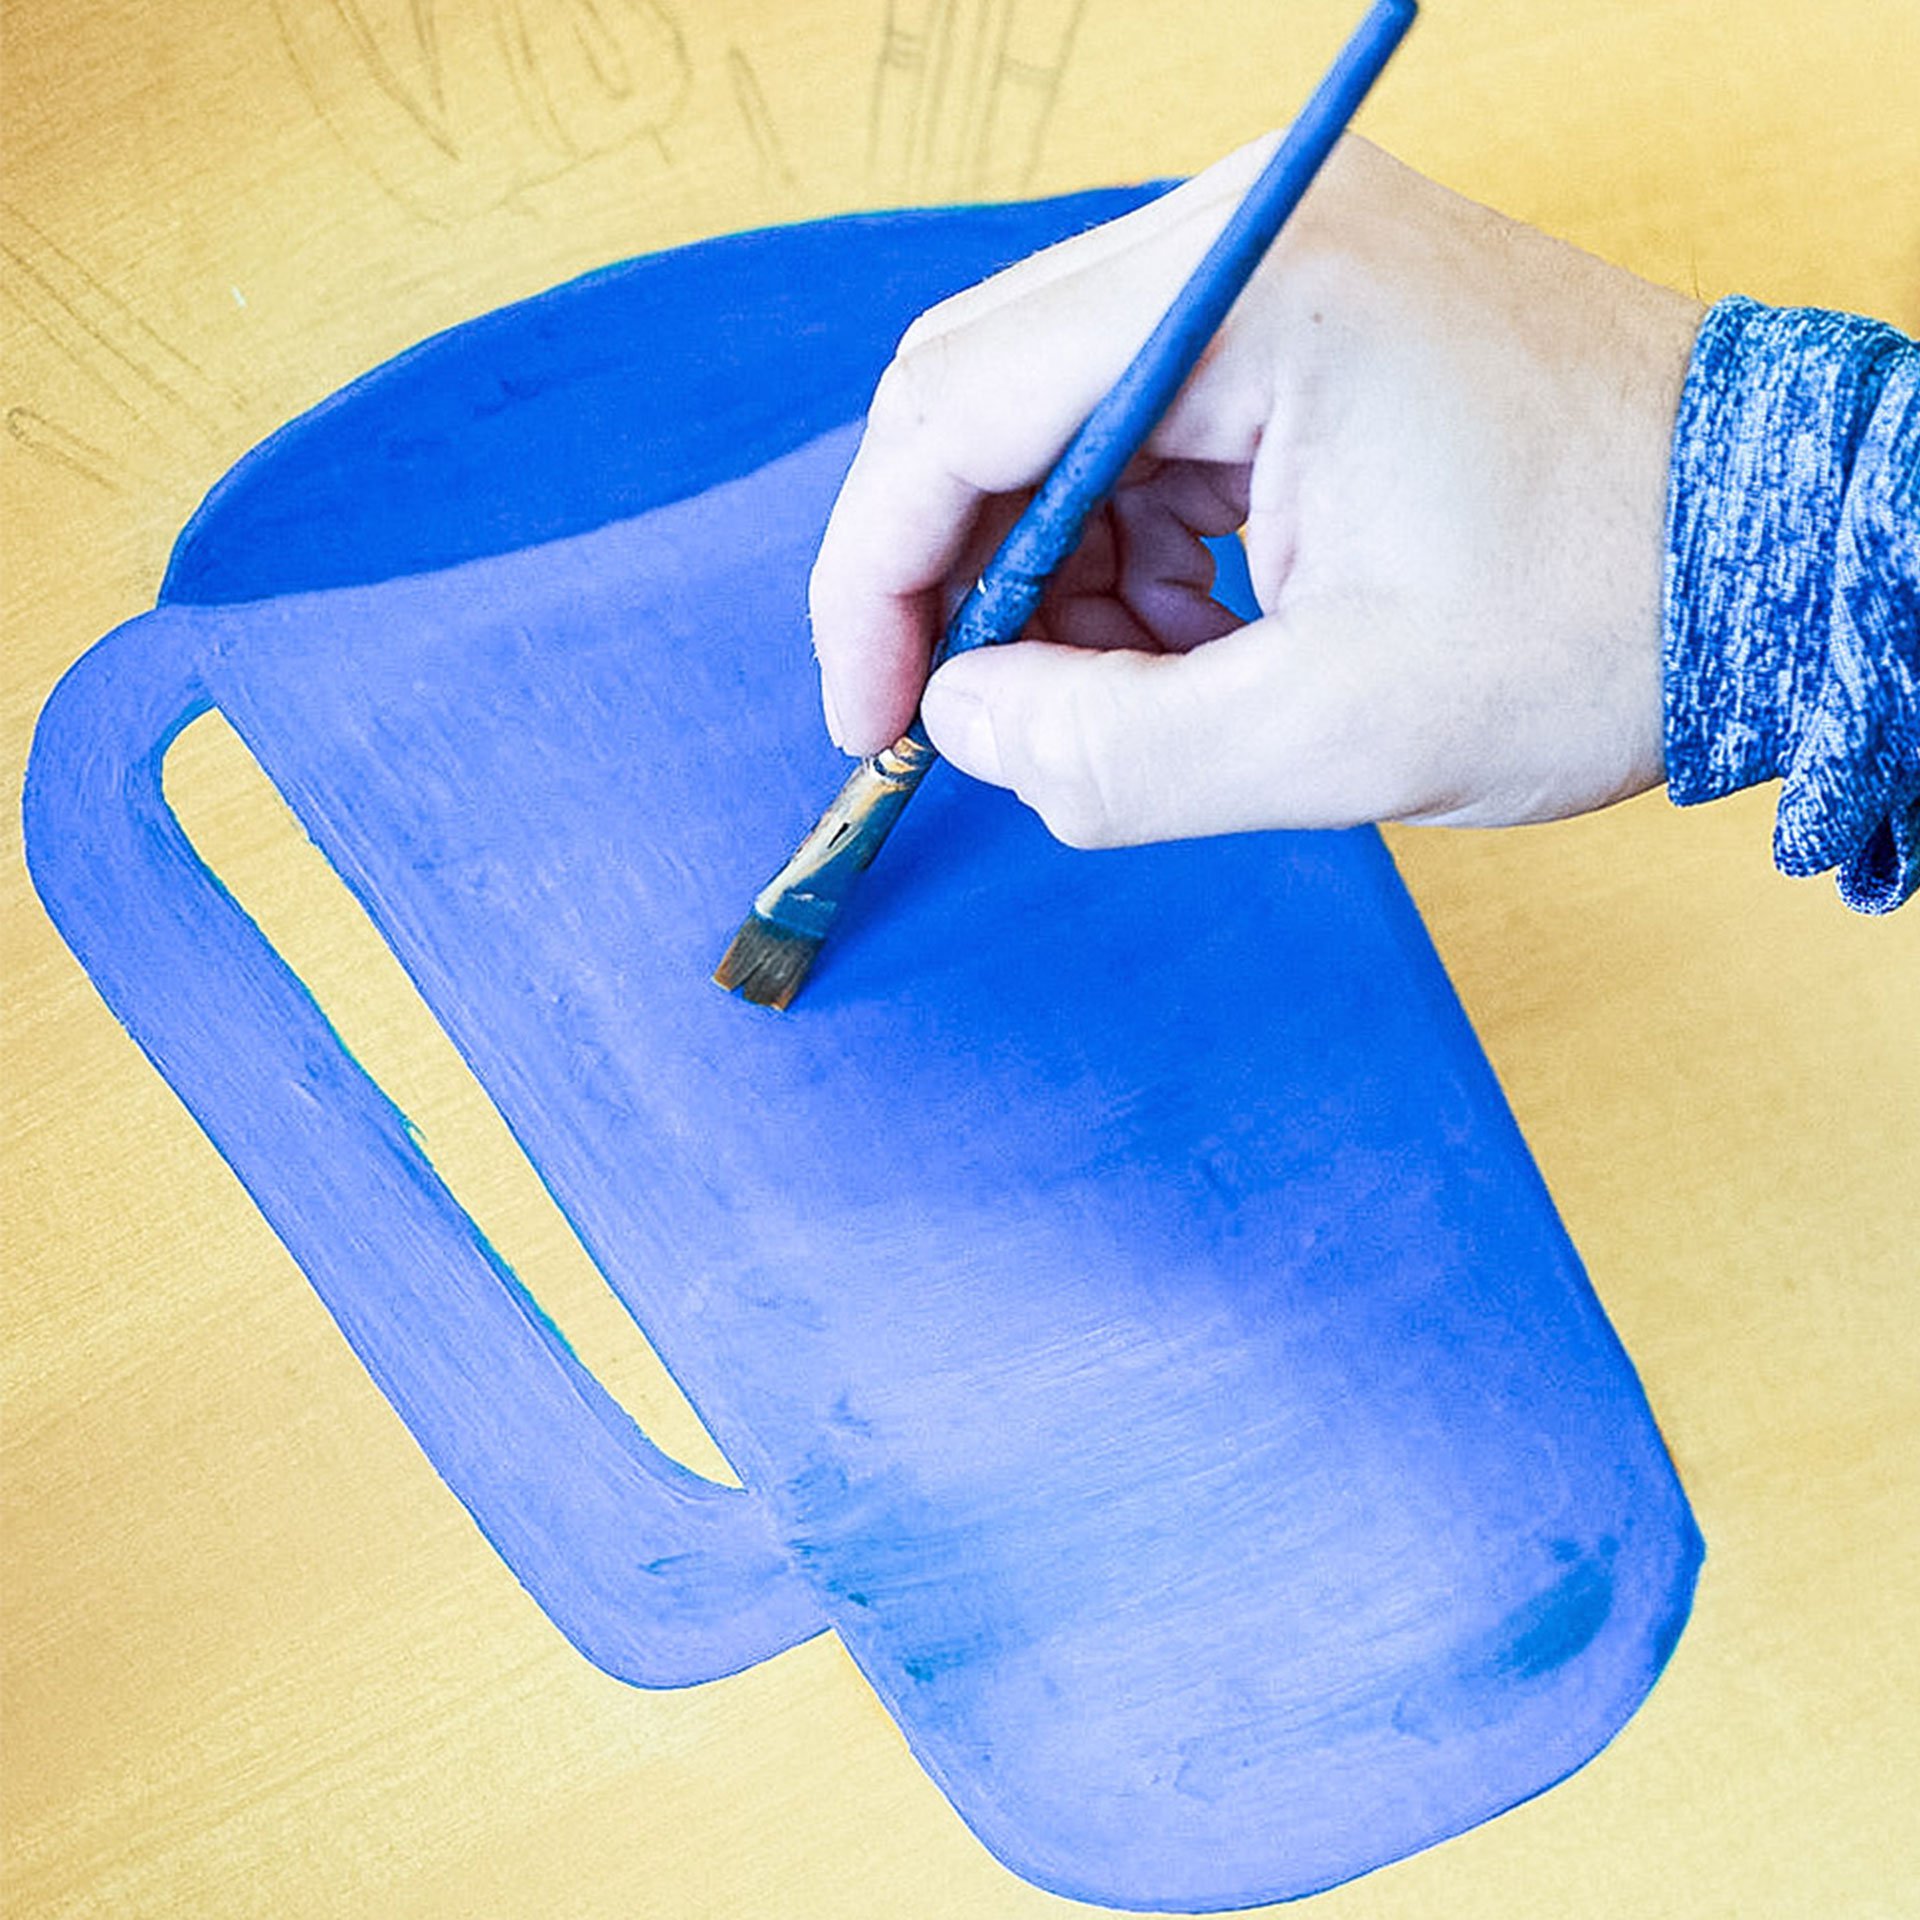 Close-up of someone painting a jug